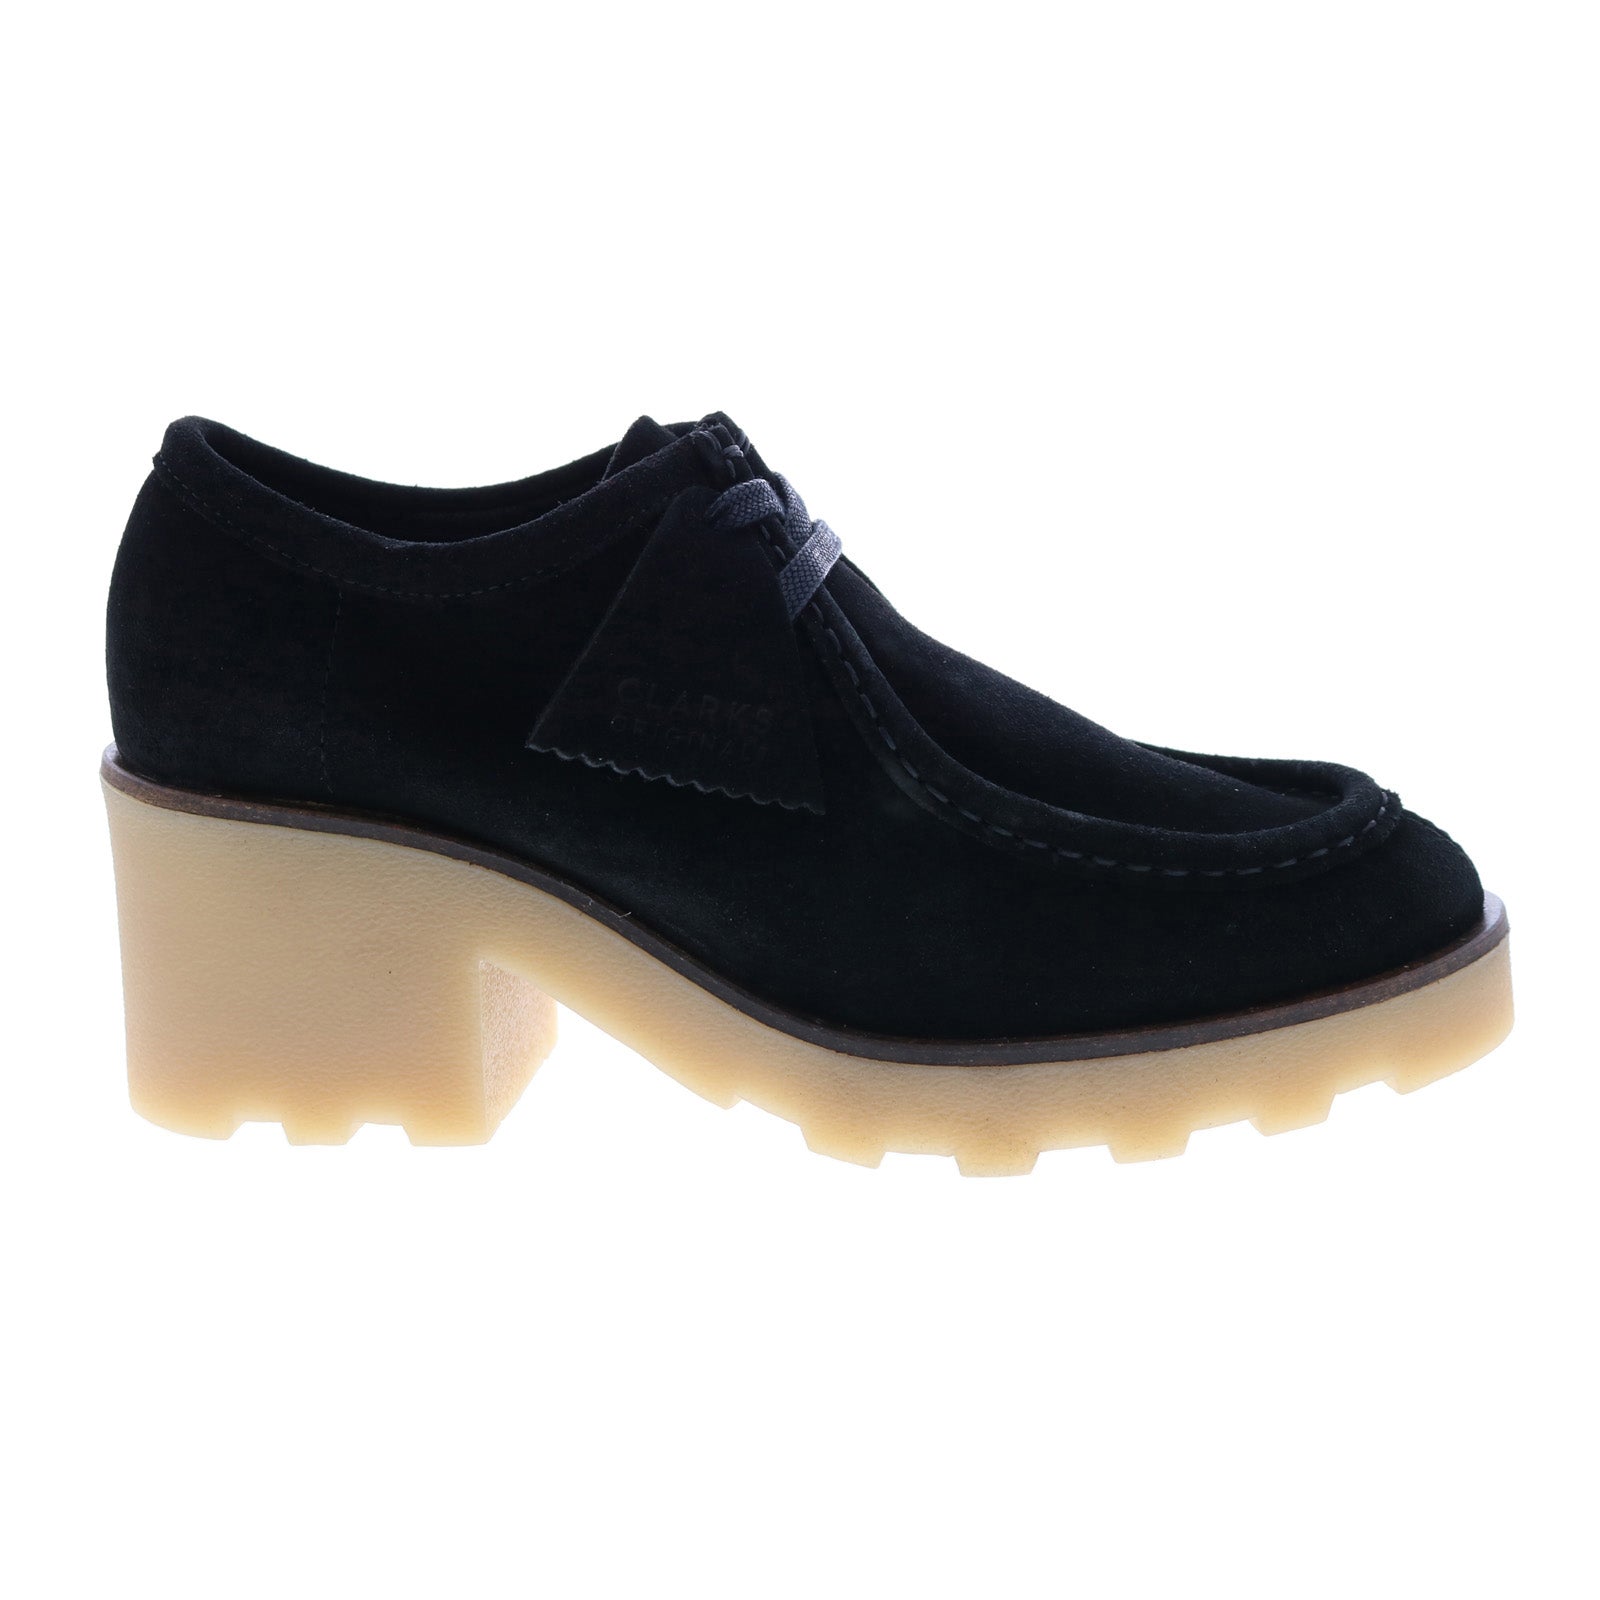 Buy Clarks Women's Bayla Nora Black Mary Jane Shoes for Women at Best Price  @ Tata CLiQ